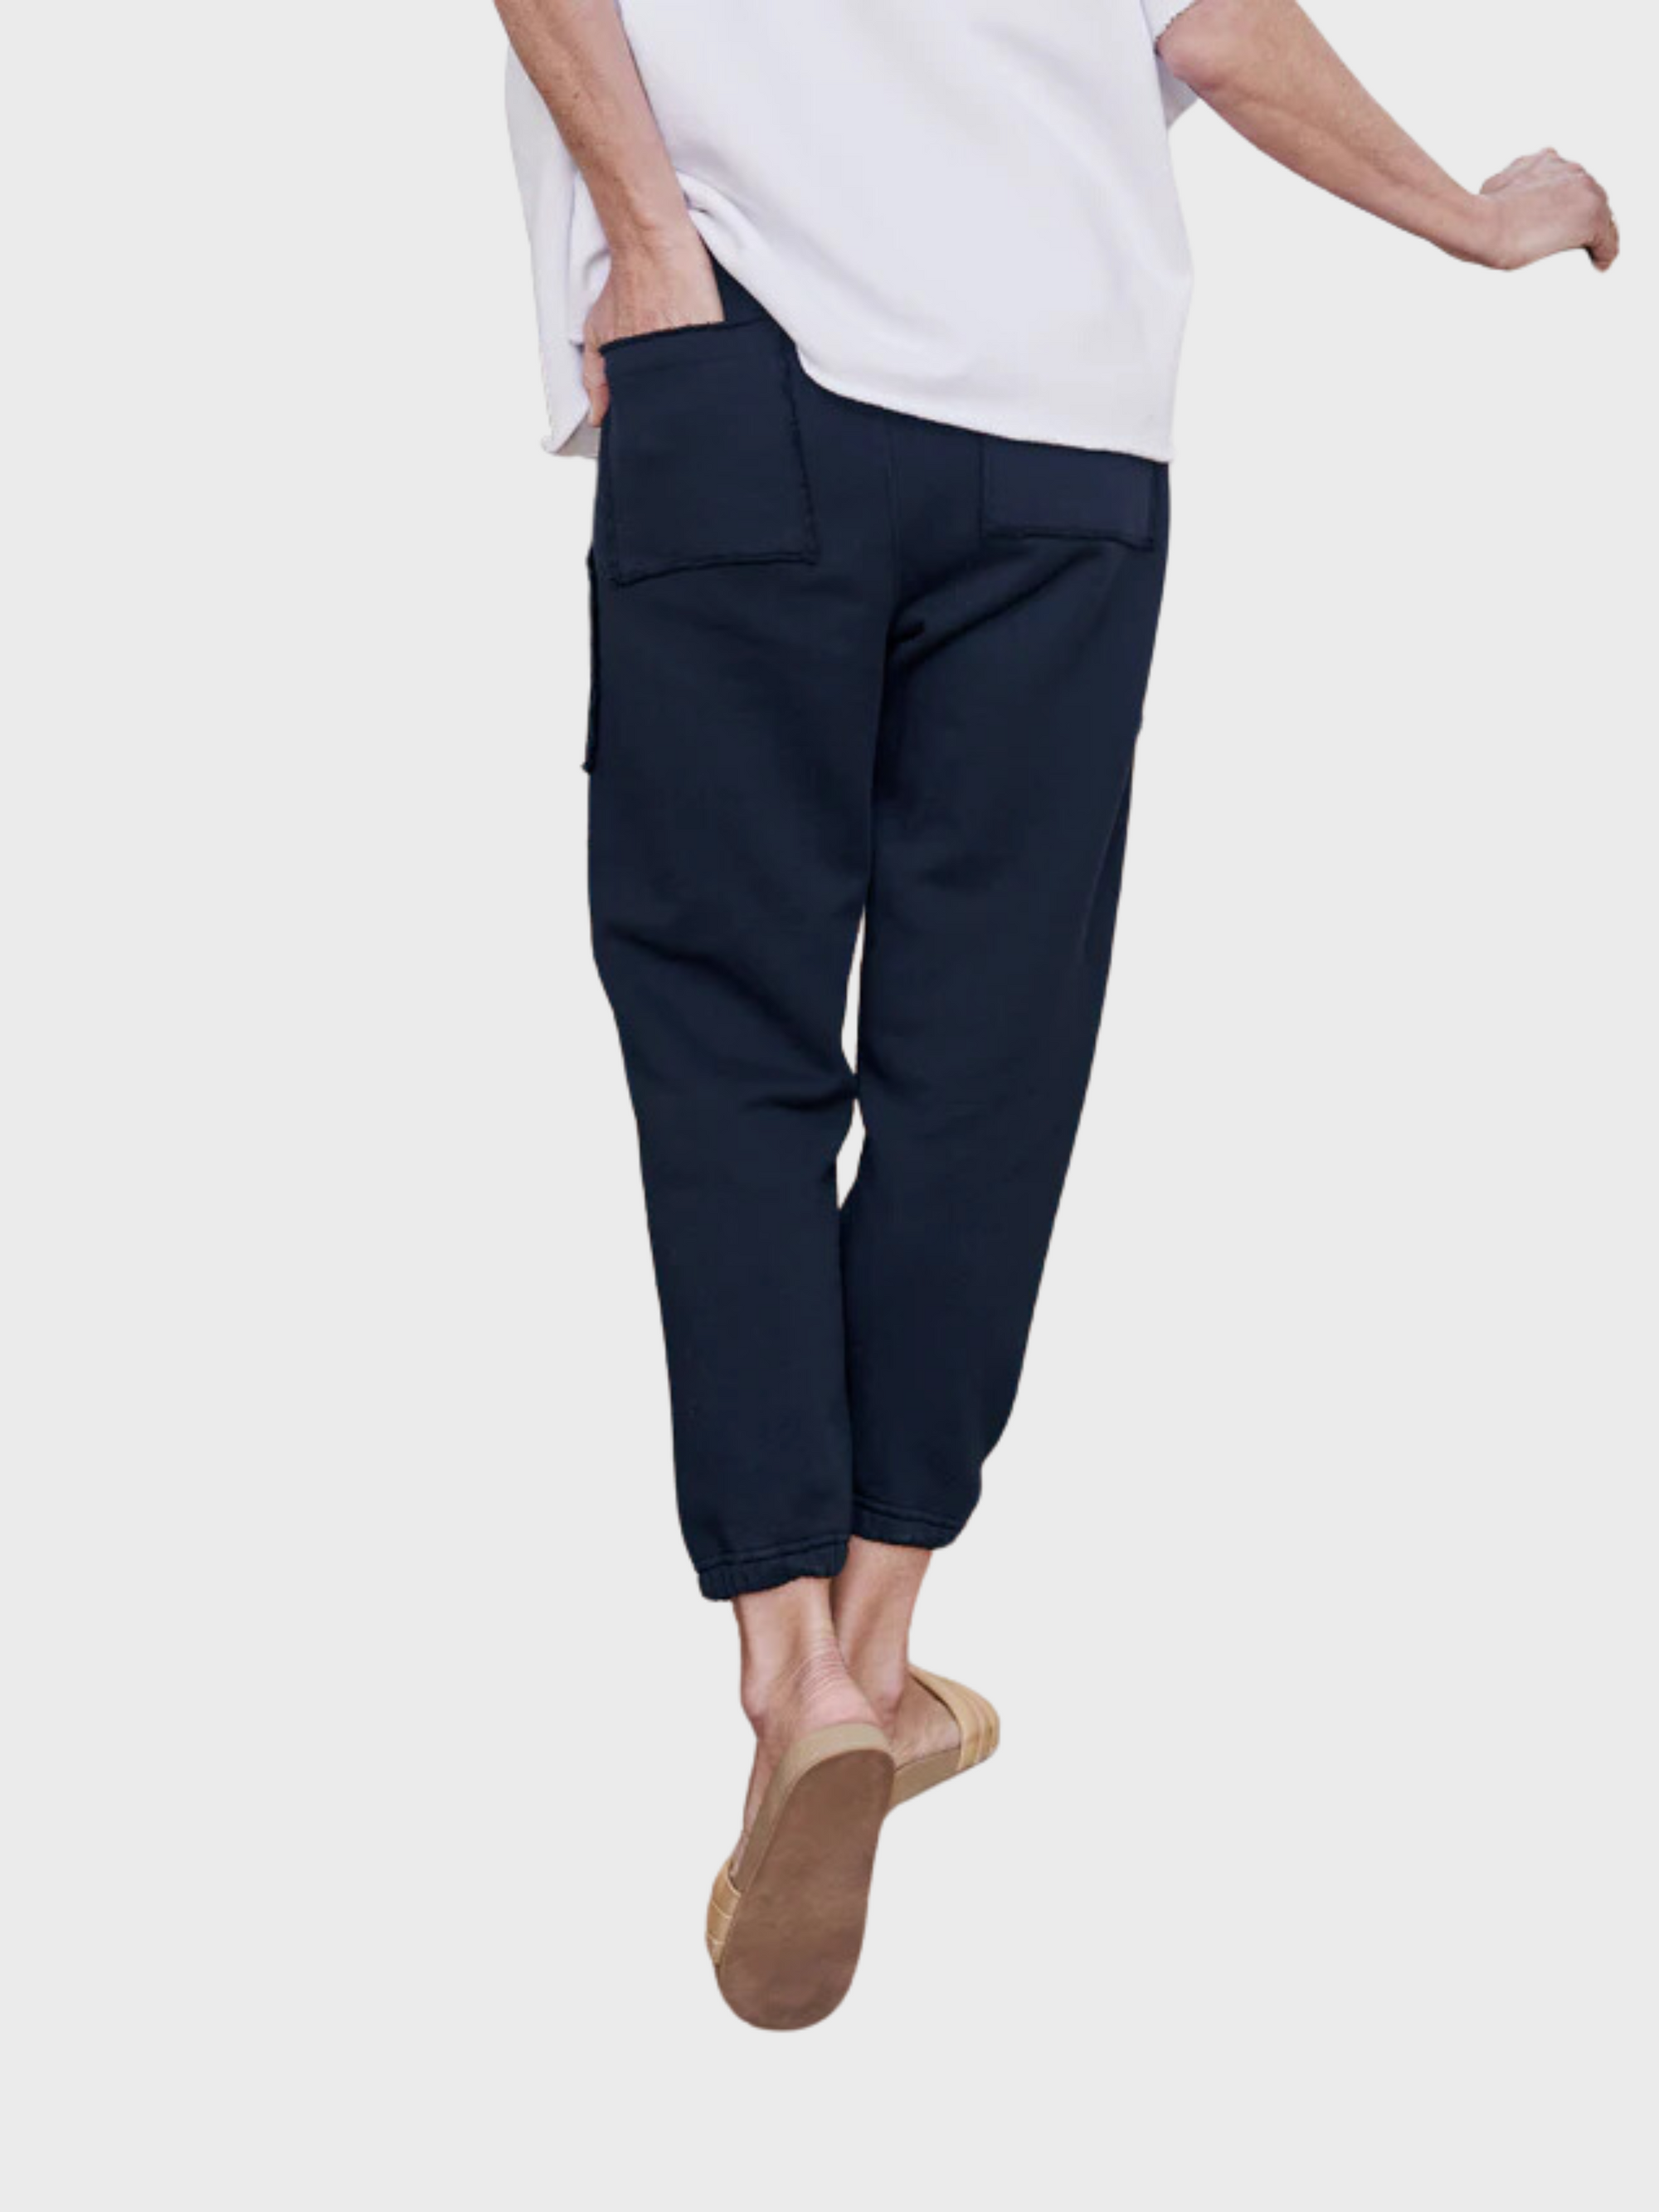 Frank & Eileen Eamon Jogger Sweatpant British Royal Navy-Pants-West of Woodward Boutique-Vancouver-Canada